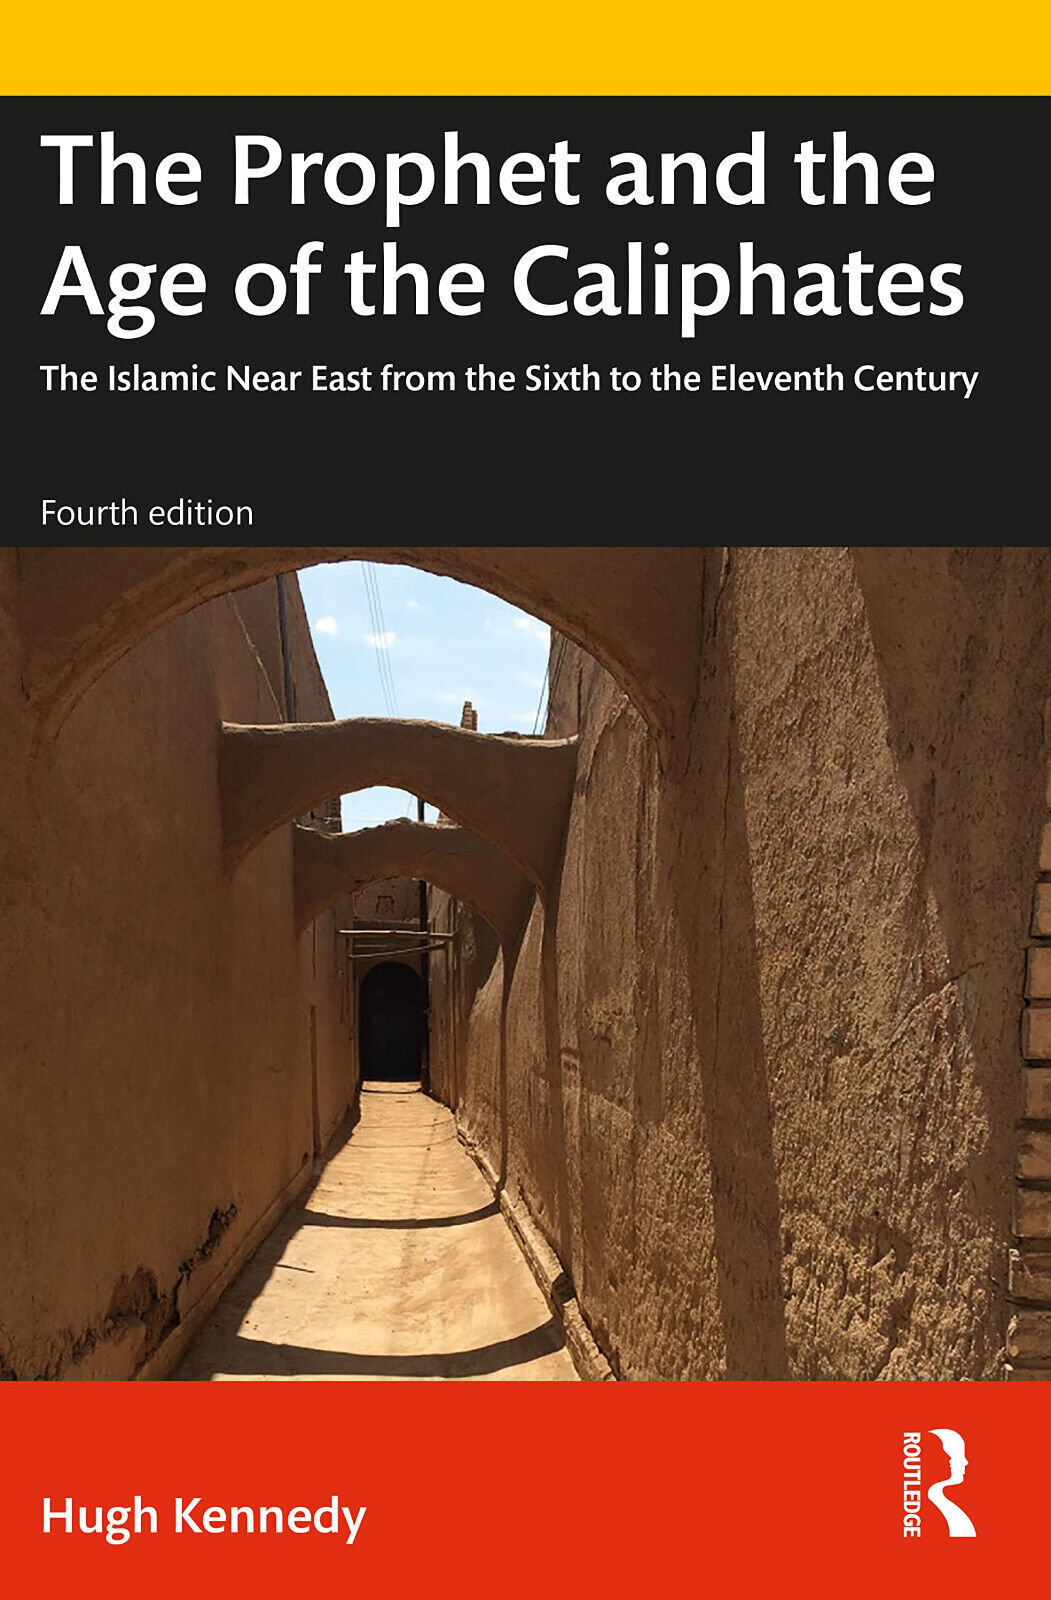 The Prophet And The Age Of The Caliphates - Hugh Kennedy - Routledge, 2022